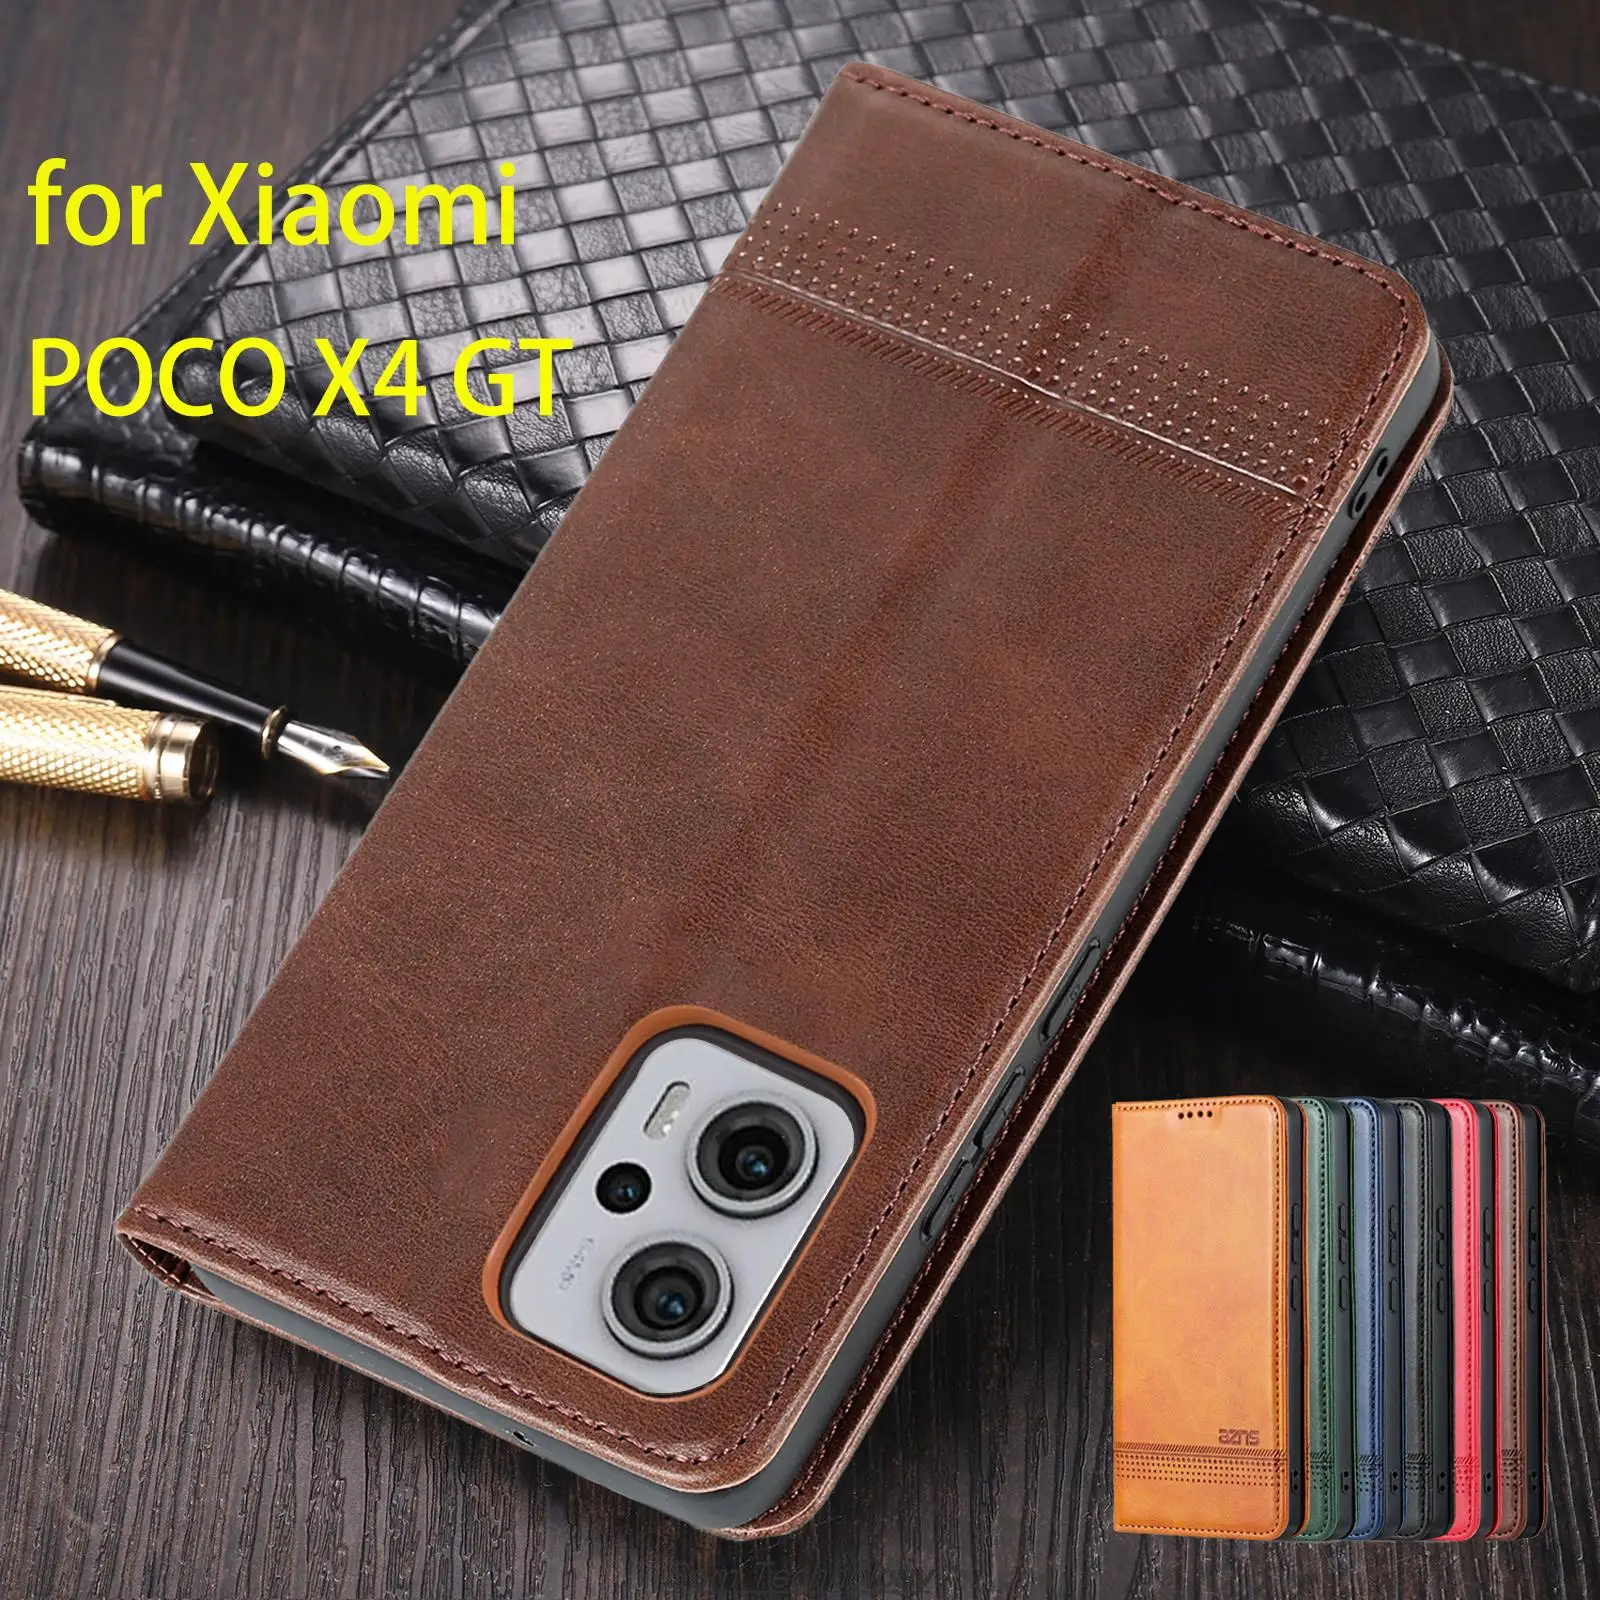 

Deluxe Magnetic Adsorption Leather Fitted Case for Xiaomi POCOPHONE POCO X4 GT 6.6" Flip Cover Protective Case Fundas Coque